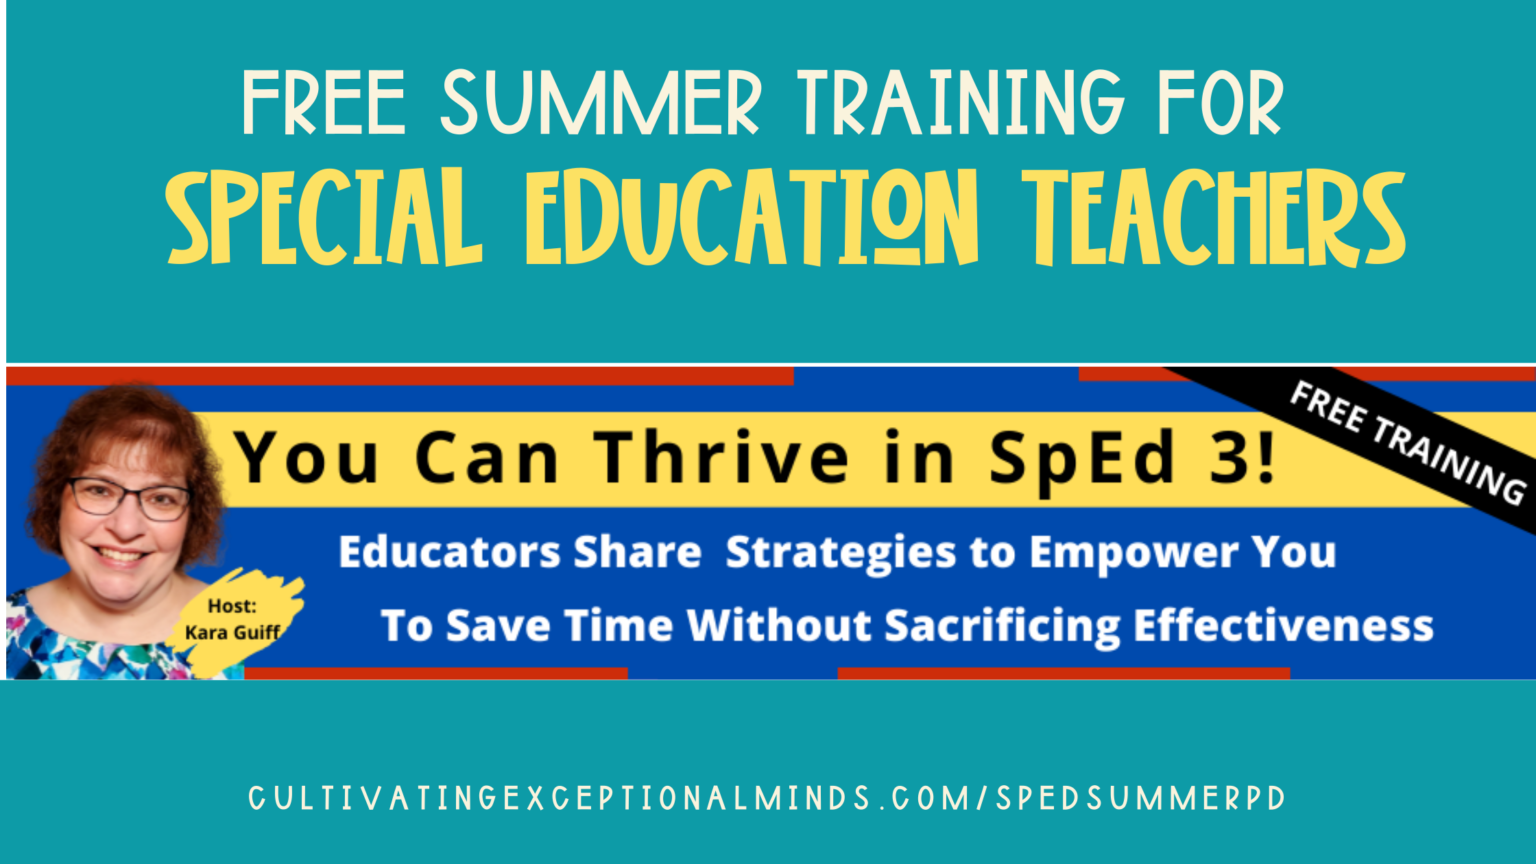 Must have sped summer pd • Cultivating Exceptional Minds